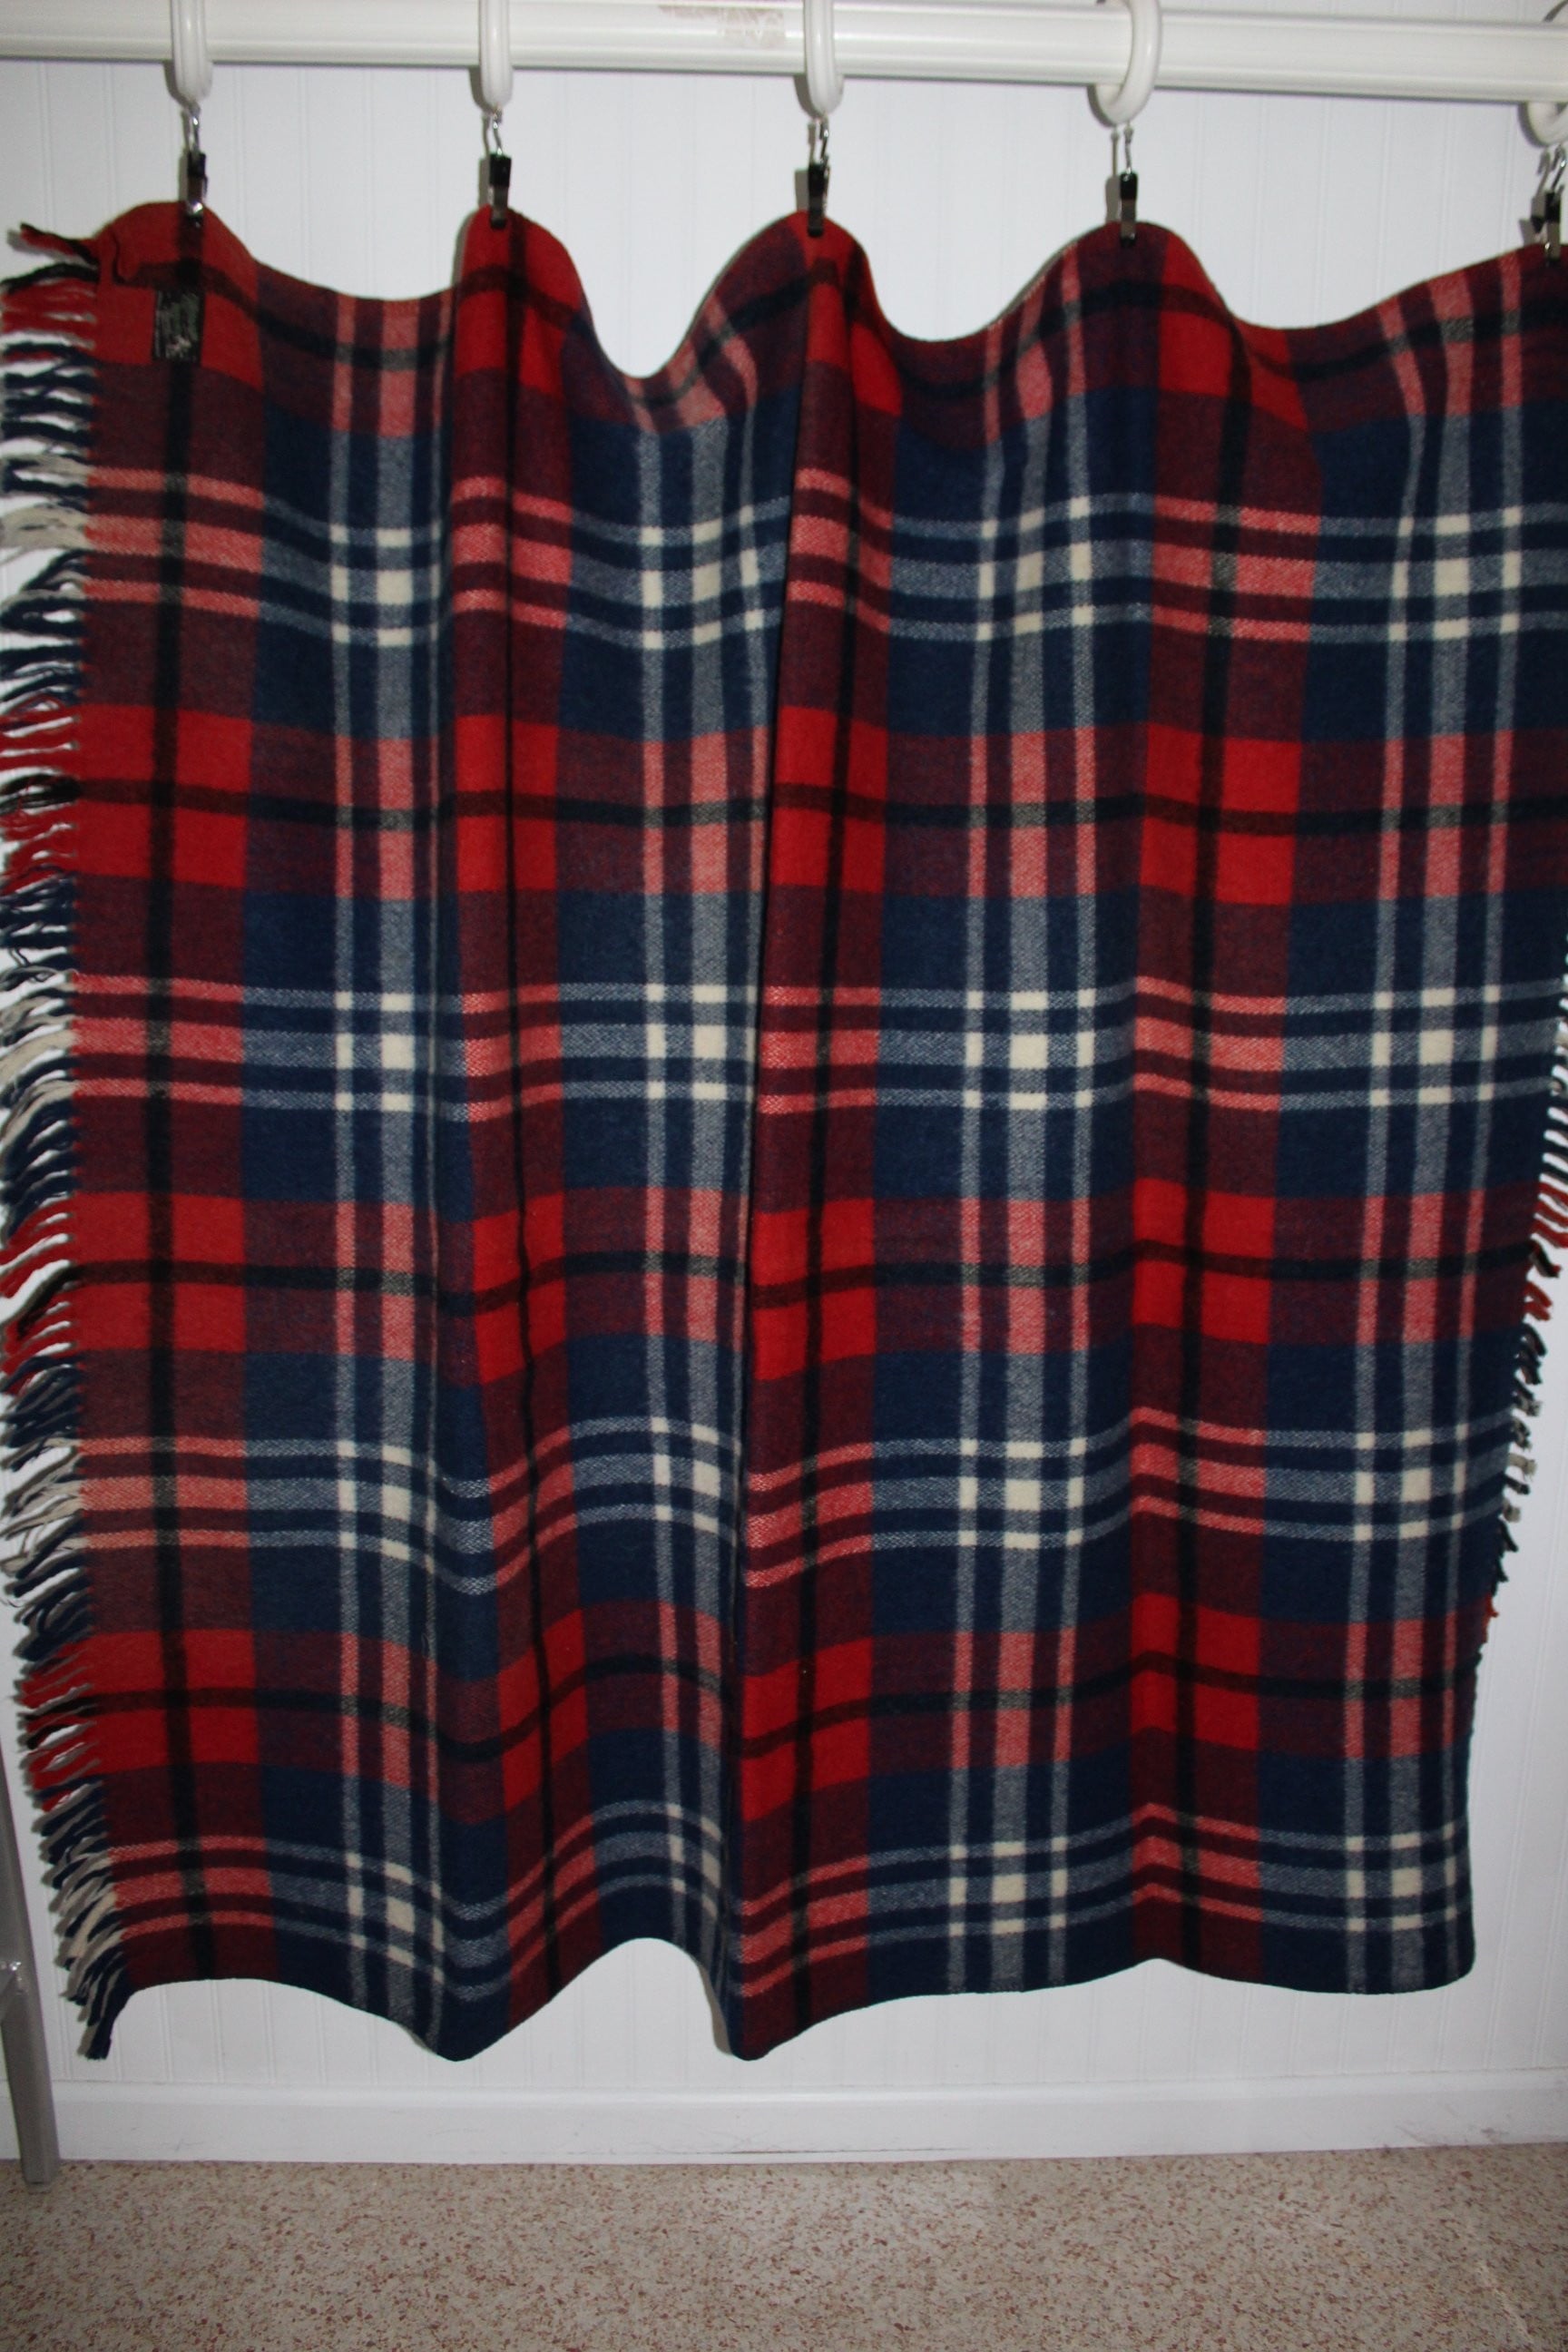 AYERS Rough Rider Wool Blanket Fringed Throw Red White Blue 56" X 62" Canada